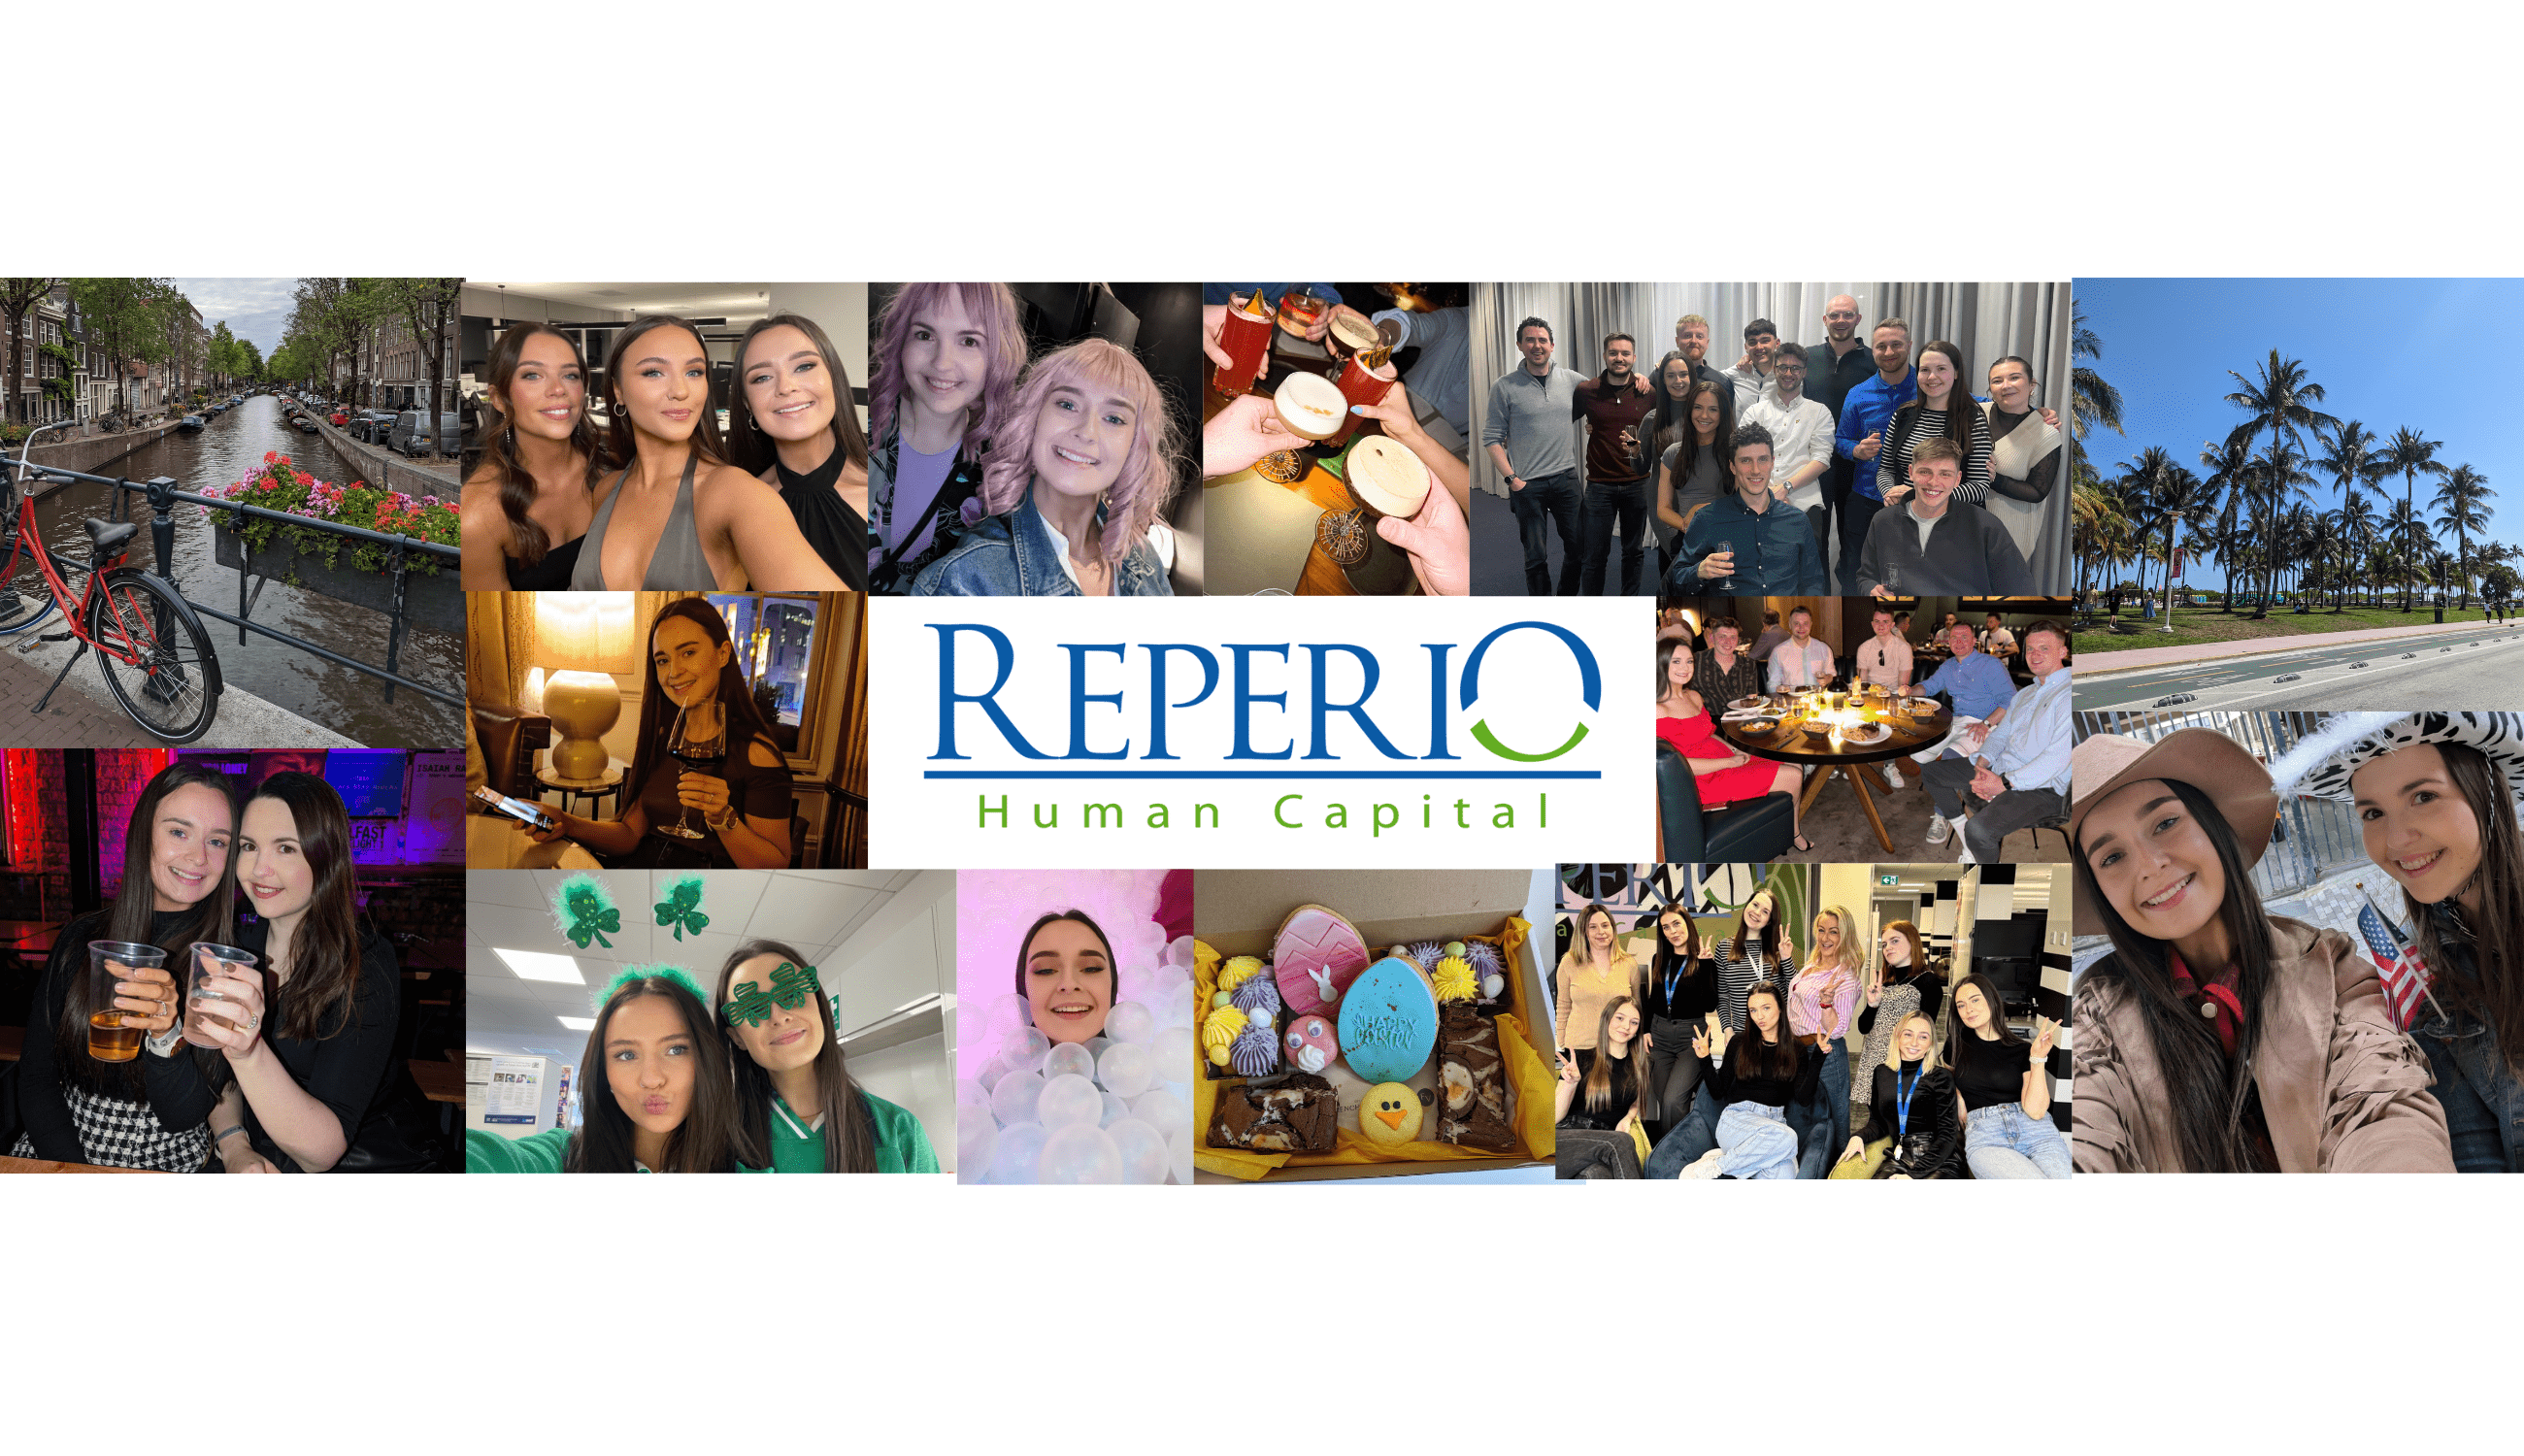 What's it like to work in Reperio?